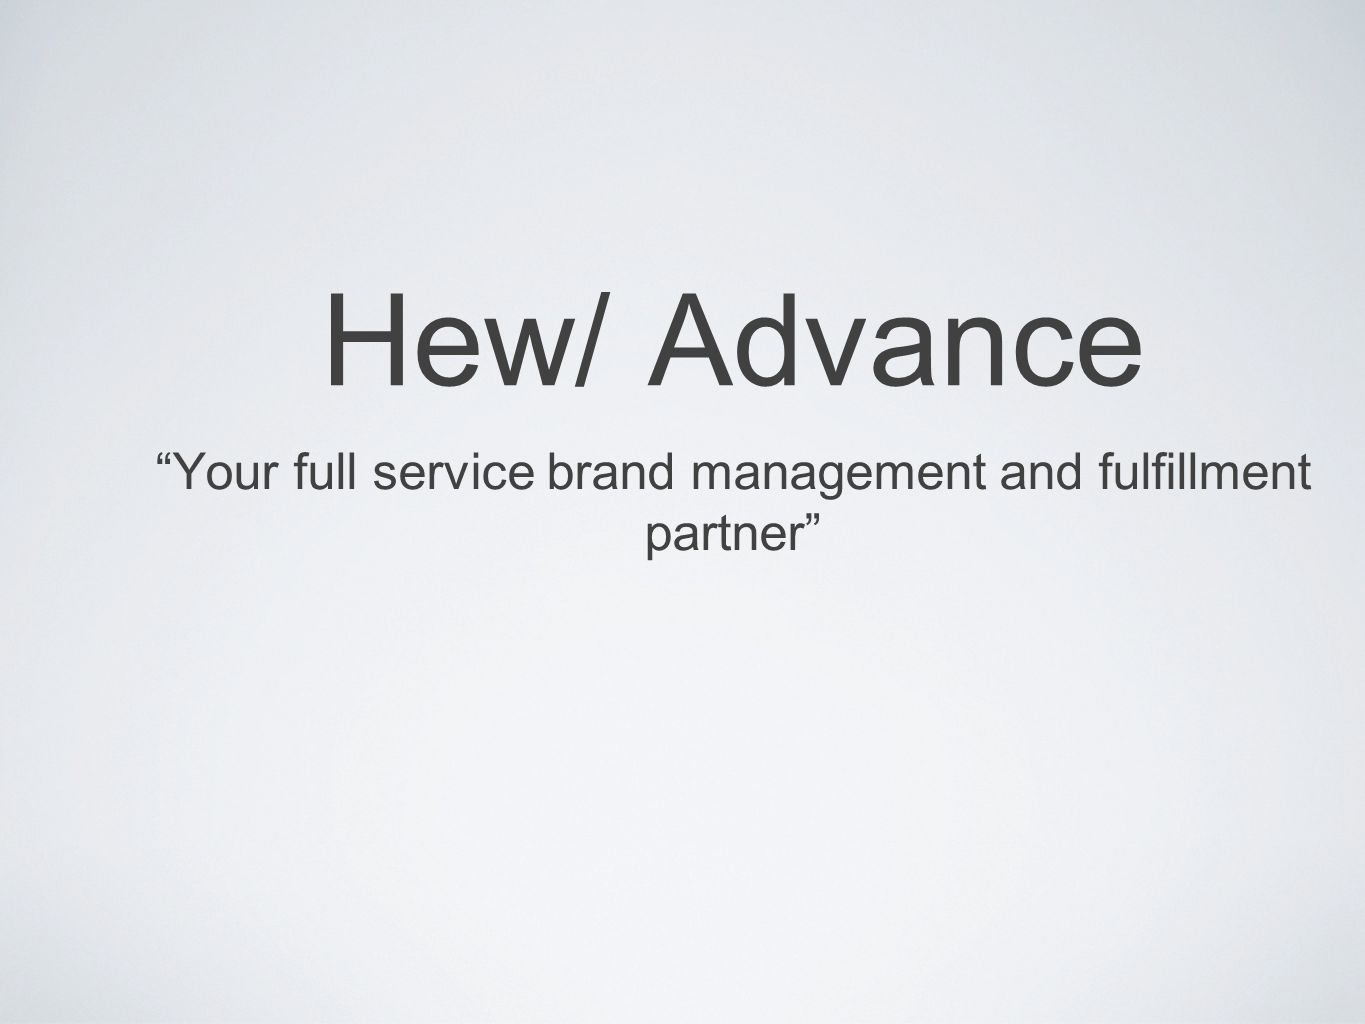 Your full service brand management and fulfillment partner